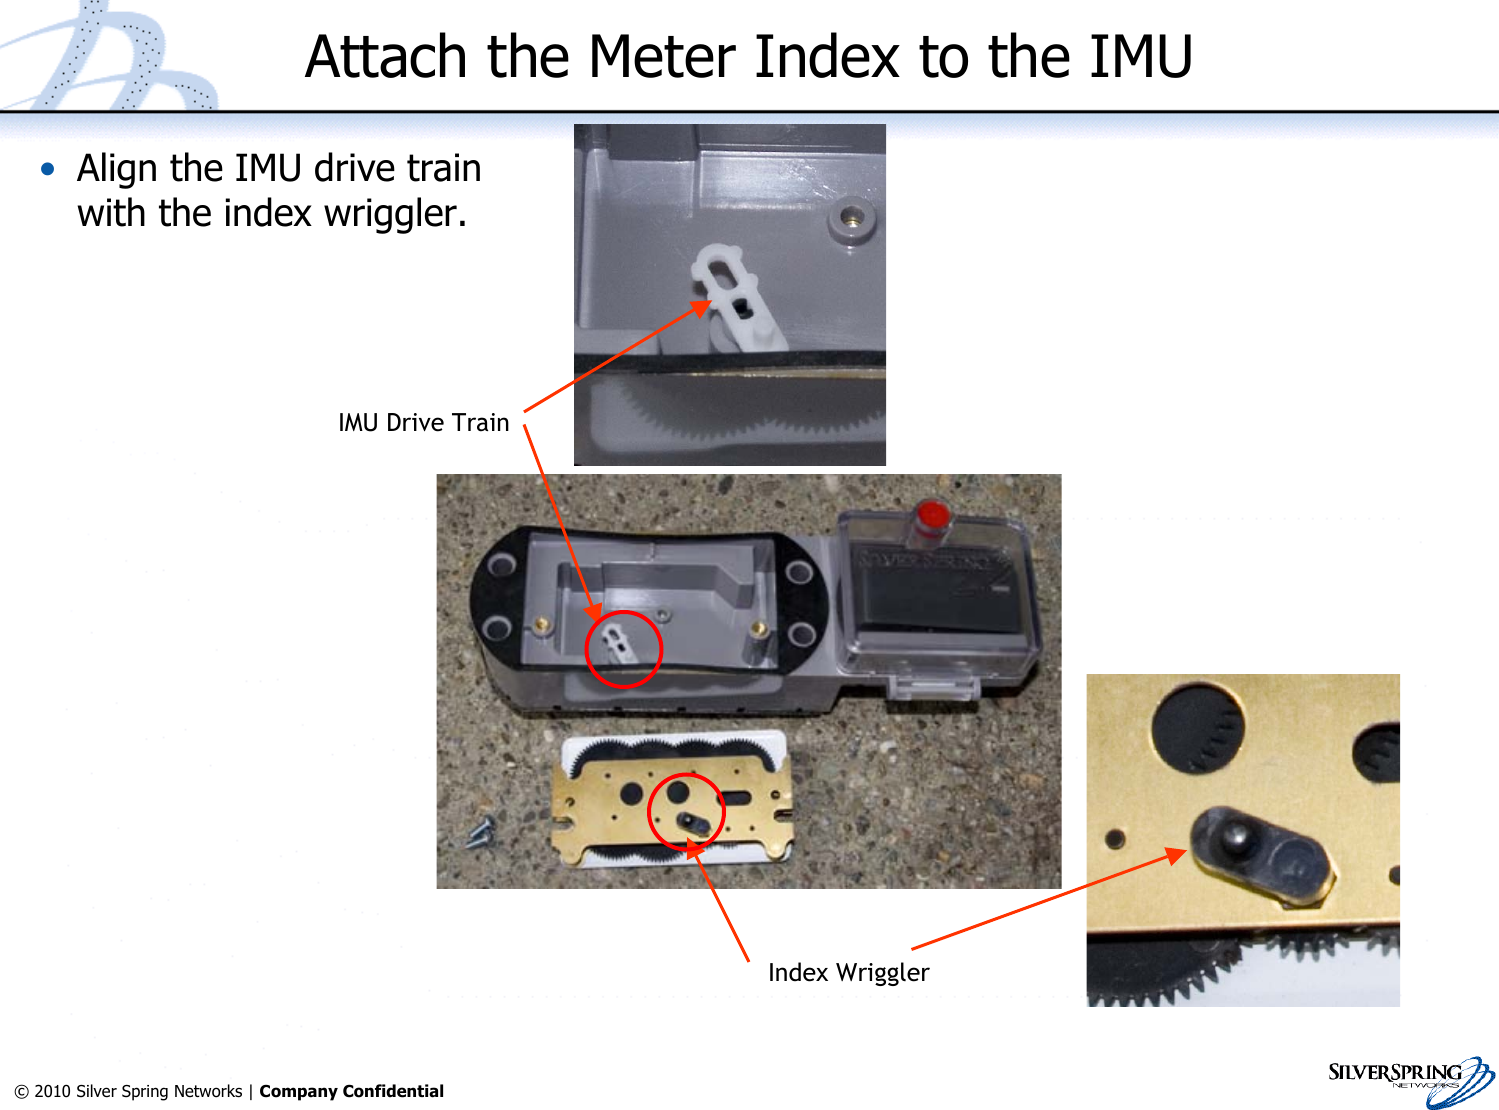 13© 2010 Silver Spring Networks | Company Confidential Attach the Meter Index to the IMU•Align the IMU drive trainwith the index wriggler.IMU Drive TrainIndex Wriggler